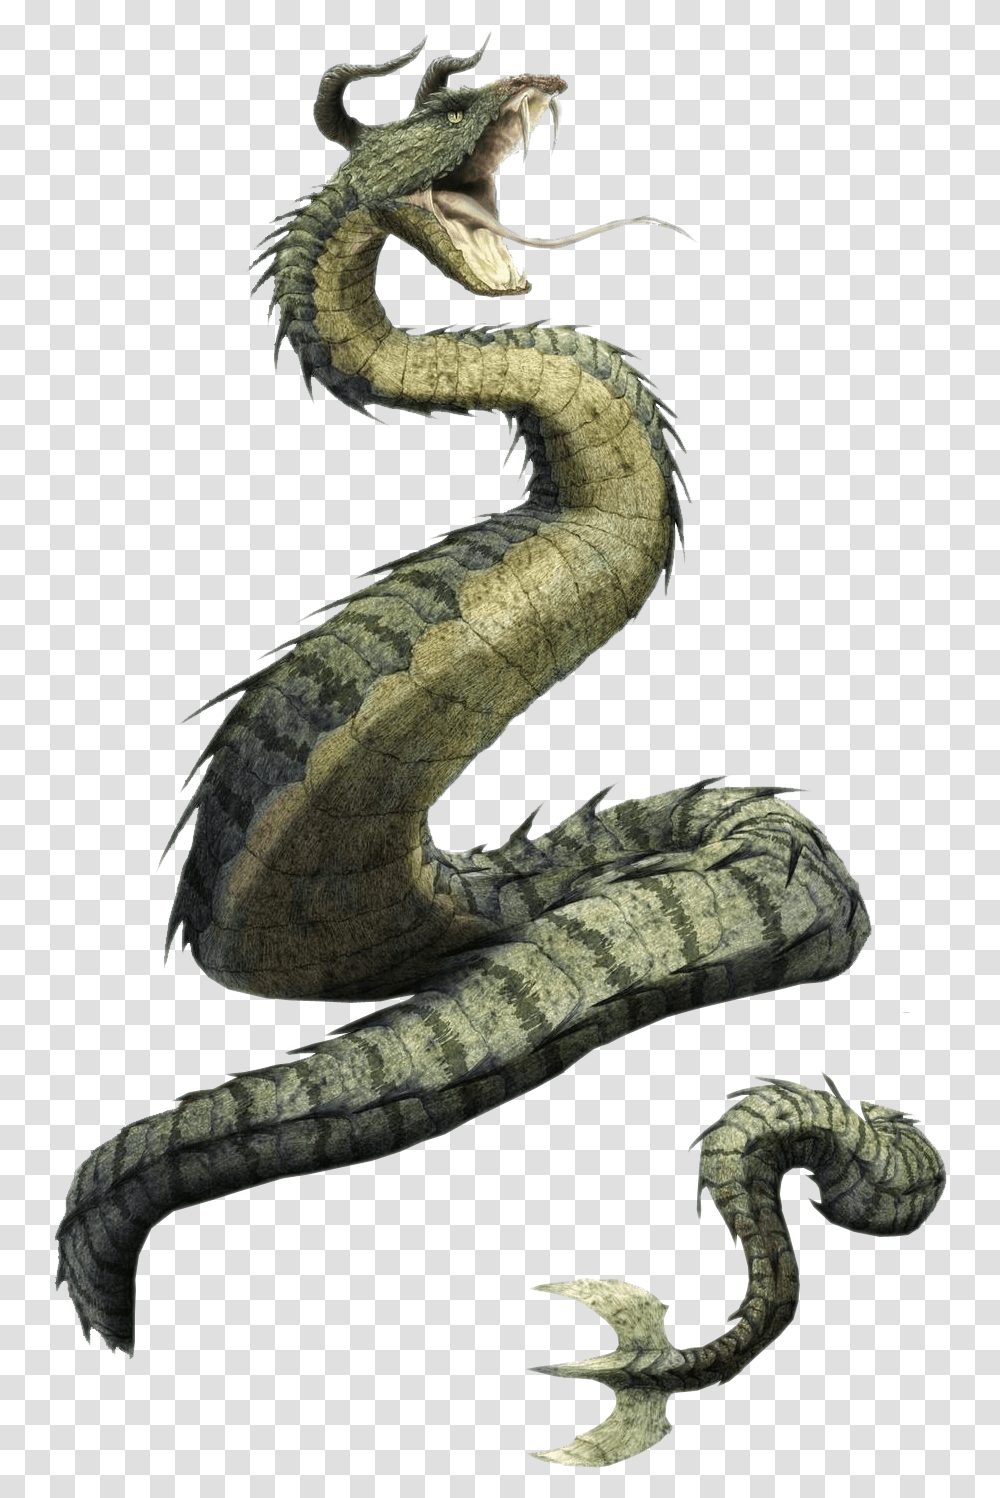 Dtpoo Mythical Snake Creatures, Reptile, Animal, Rattlesnake Transparent Png